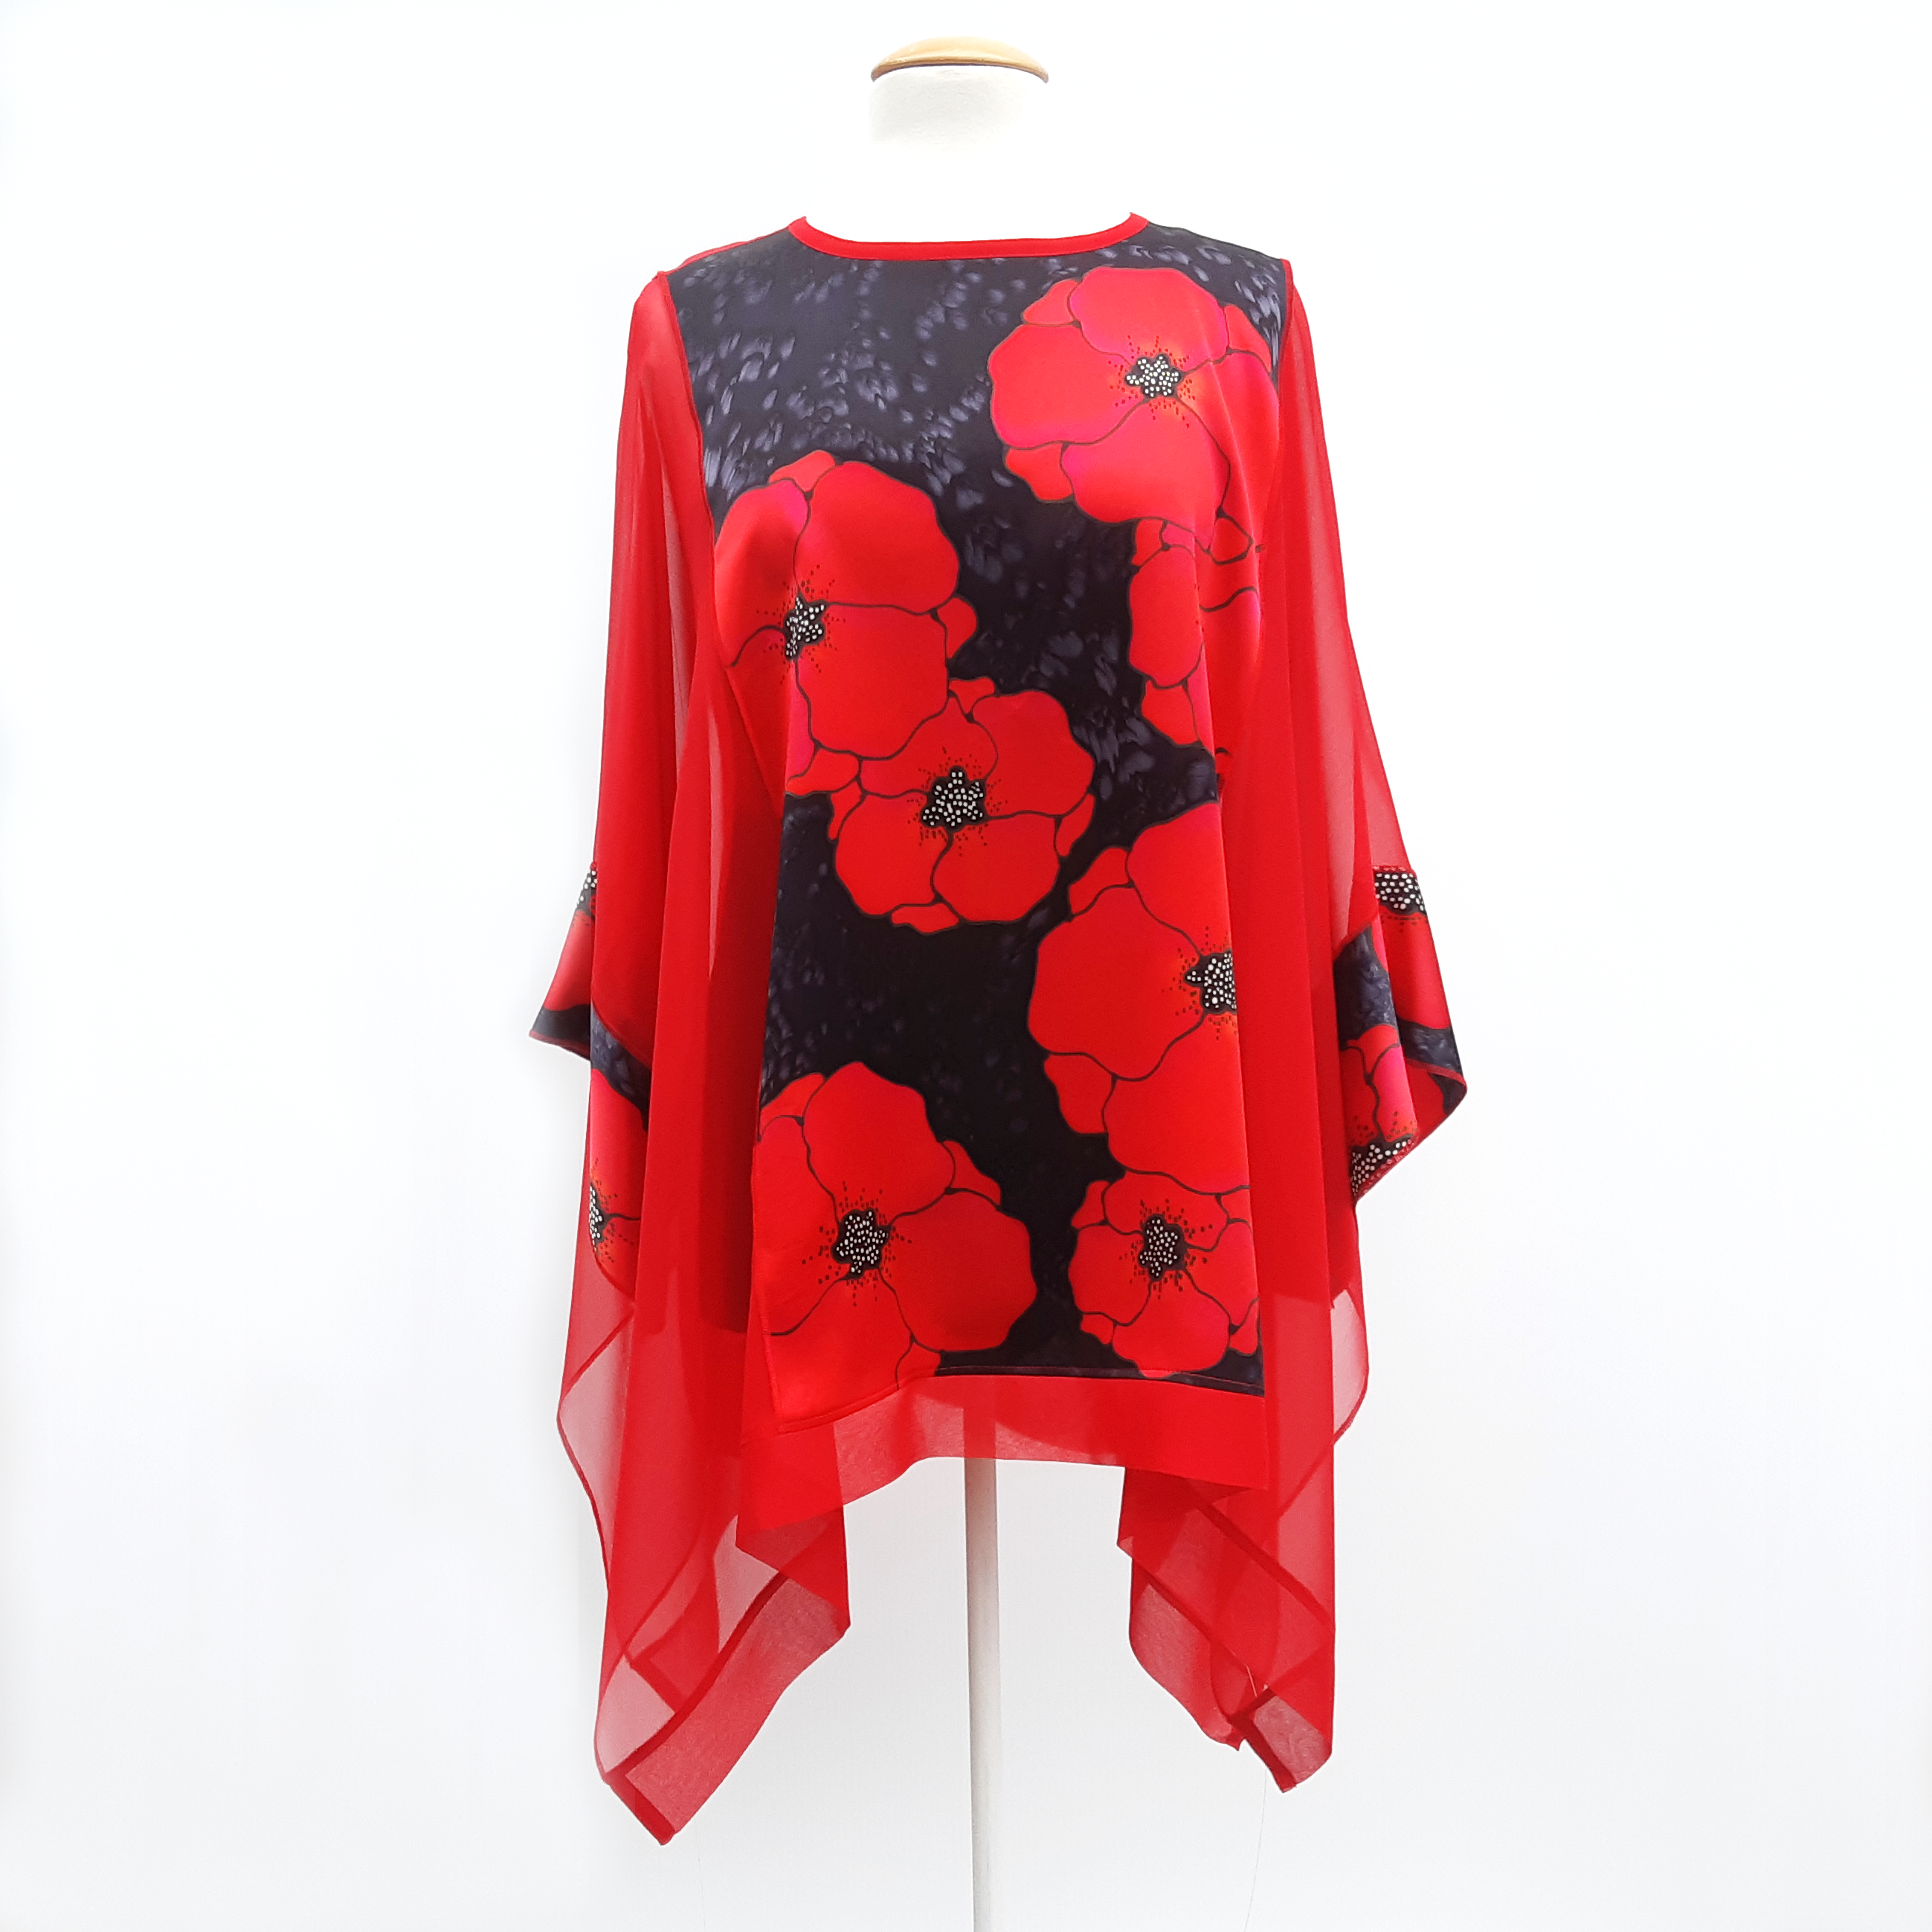 Plus size caftan top red silk for weddings and cruise wear made in Canada